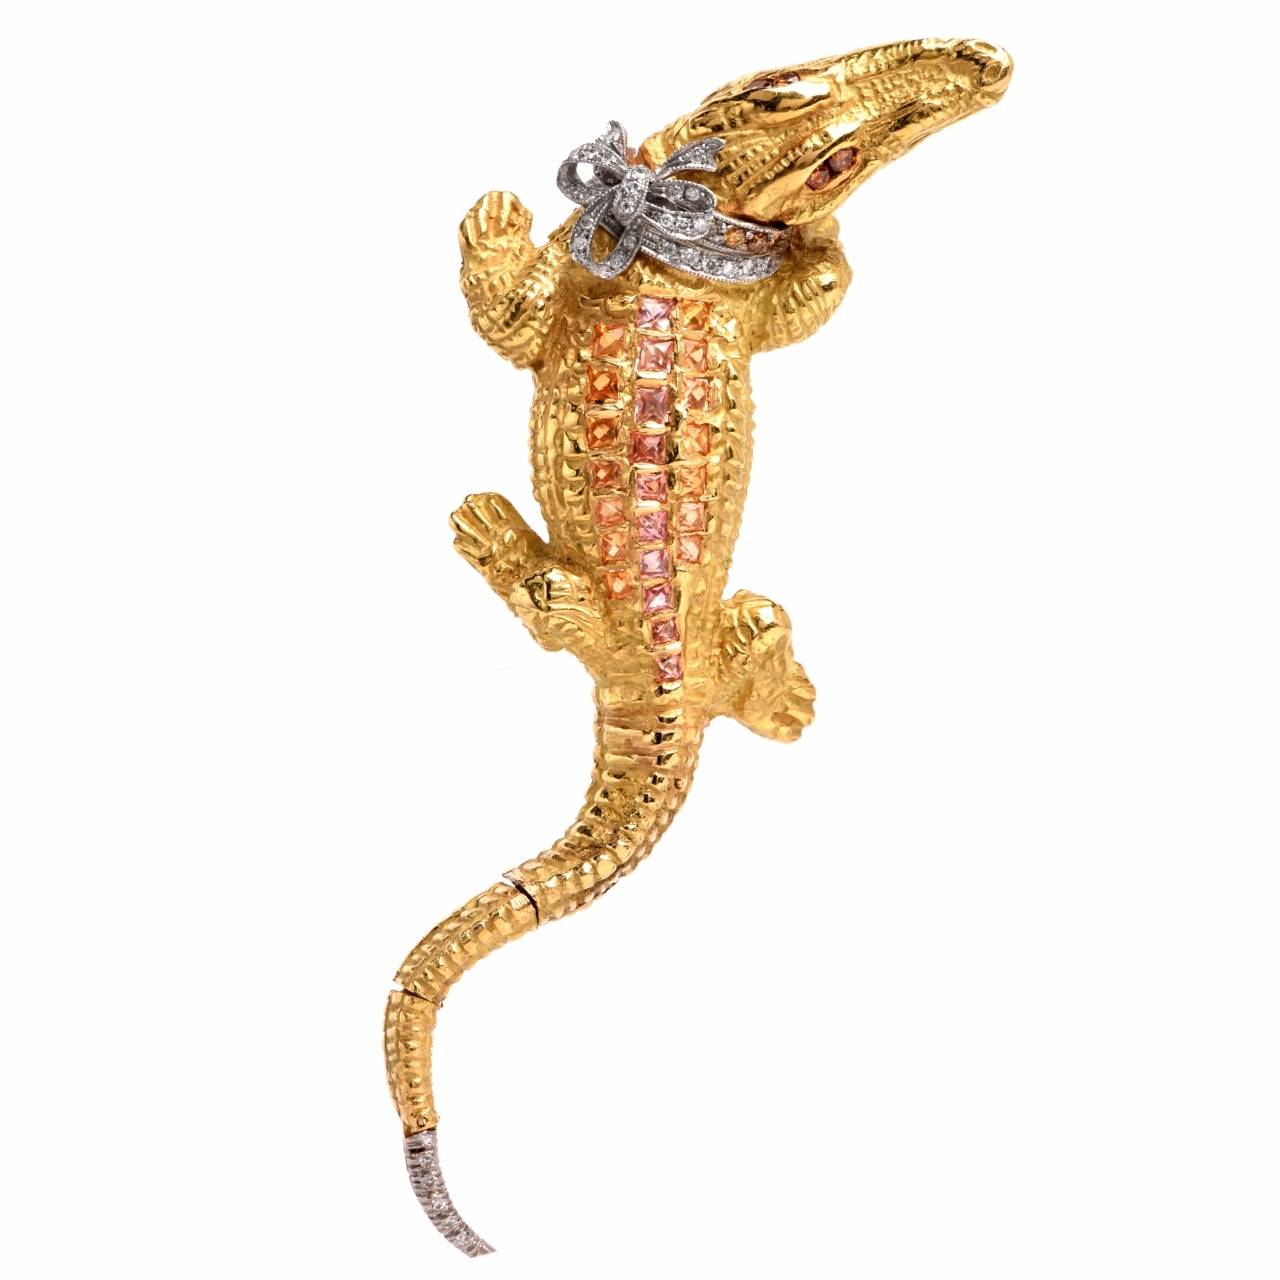 his vintage Retro  lapel brooch of  opulent aesthetic is of Italian provenance, handcrafted and signed by Capello Jewelers of Torino, Italy. It is crafted in solid 18K yellow gold, weighing 68.6 grams and depicts the artfully designed  sculptured